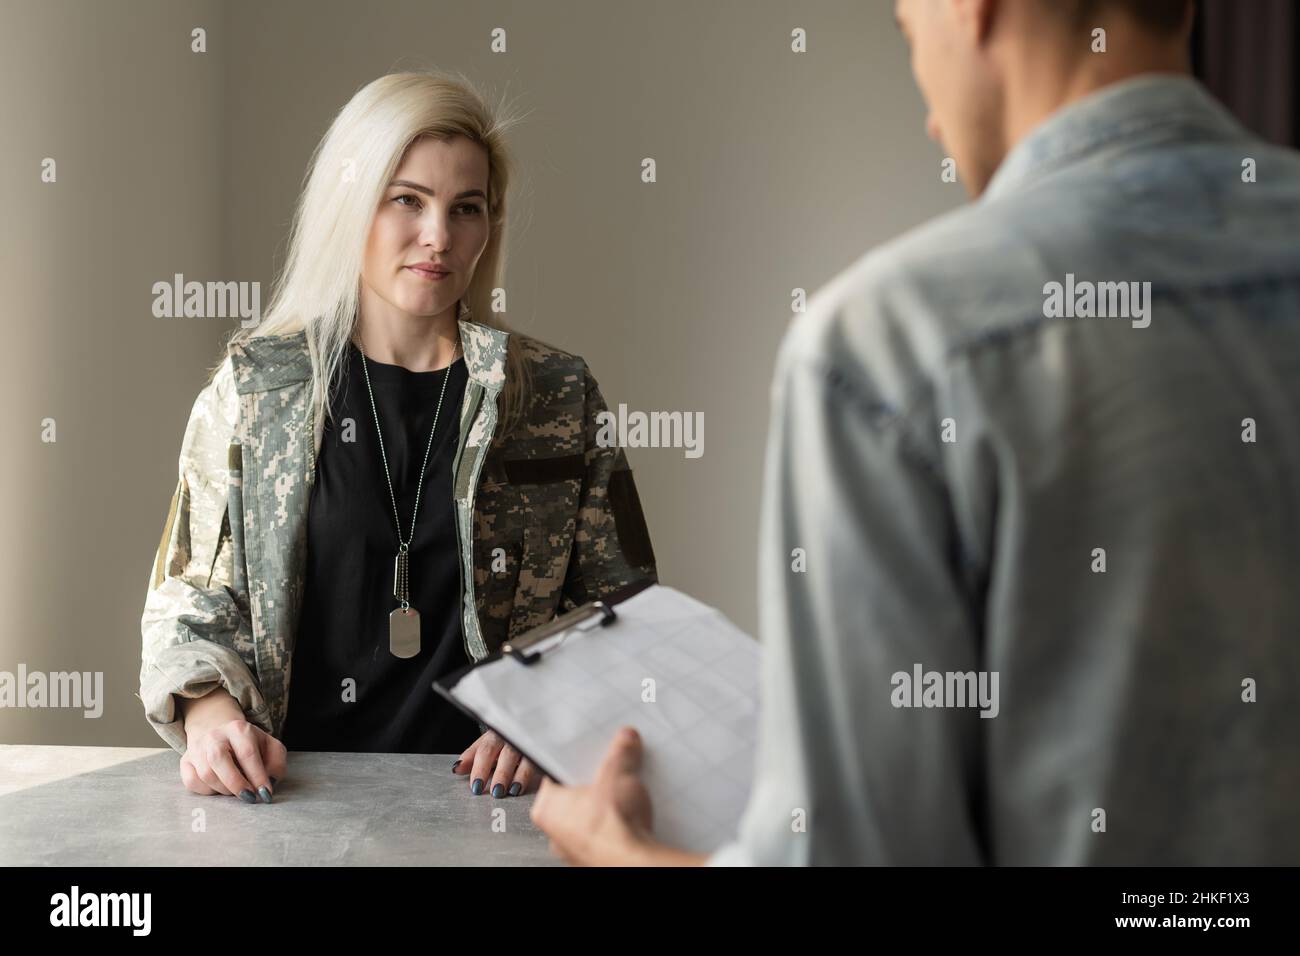 Patriotic military woman. Young patriotic military woman speaking with psychologist making notes Stock Photo